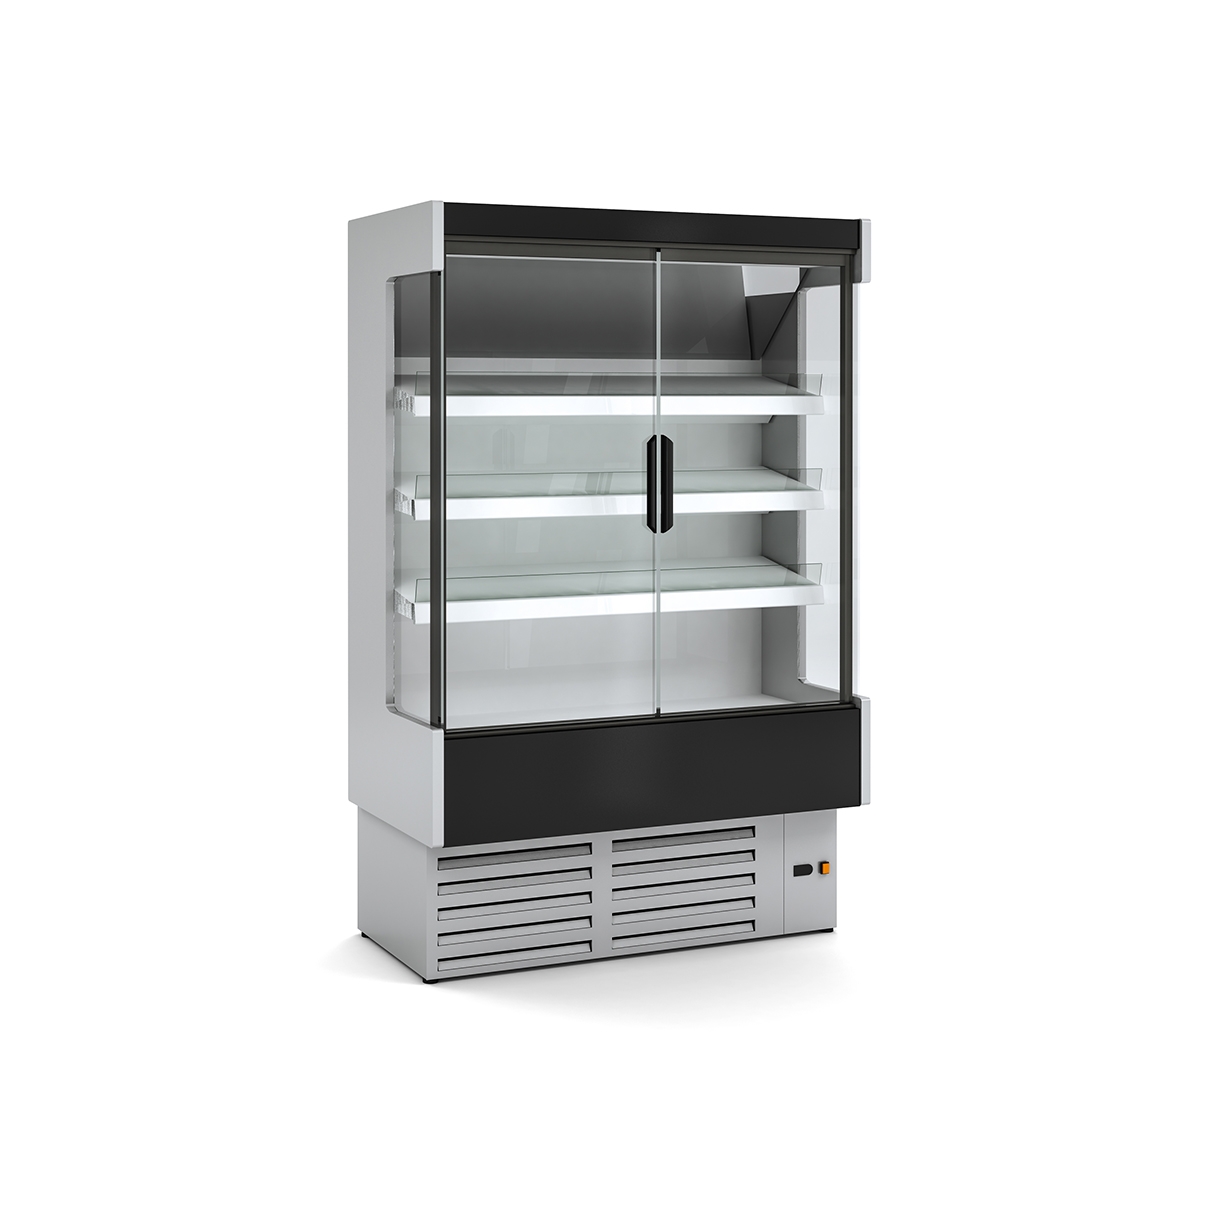 copy of REFRIGERATED WALL-MOUNTED DISPLAY CABINET DG0 H1